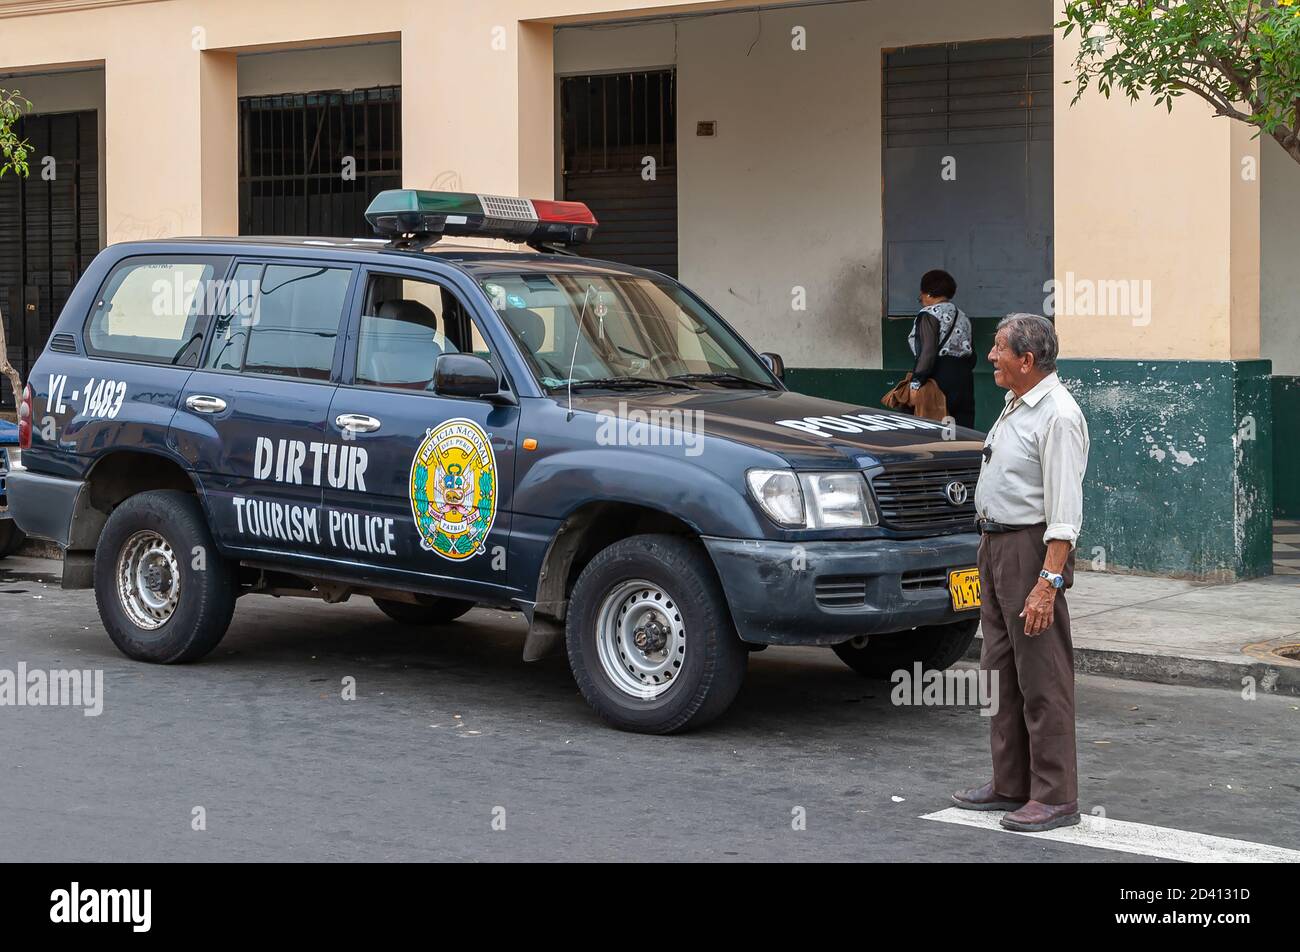 Lima, Peru - December 4, 2008: Closeup of black Tourism Police SUV Toyota car parked along street. Senior man nearby. Beige building facade in back. C Stock Photo